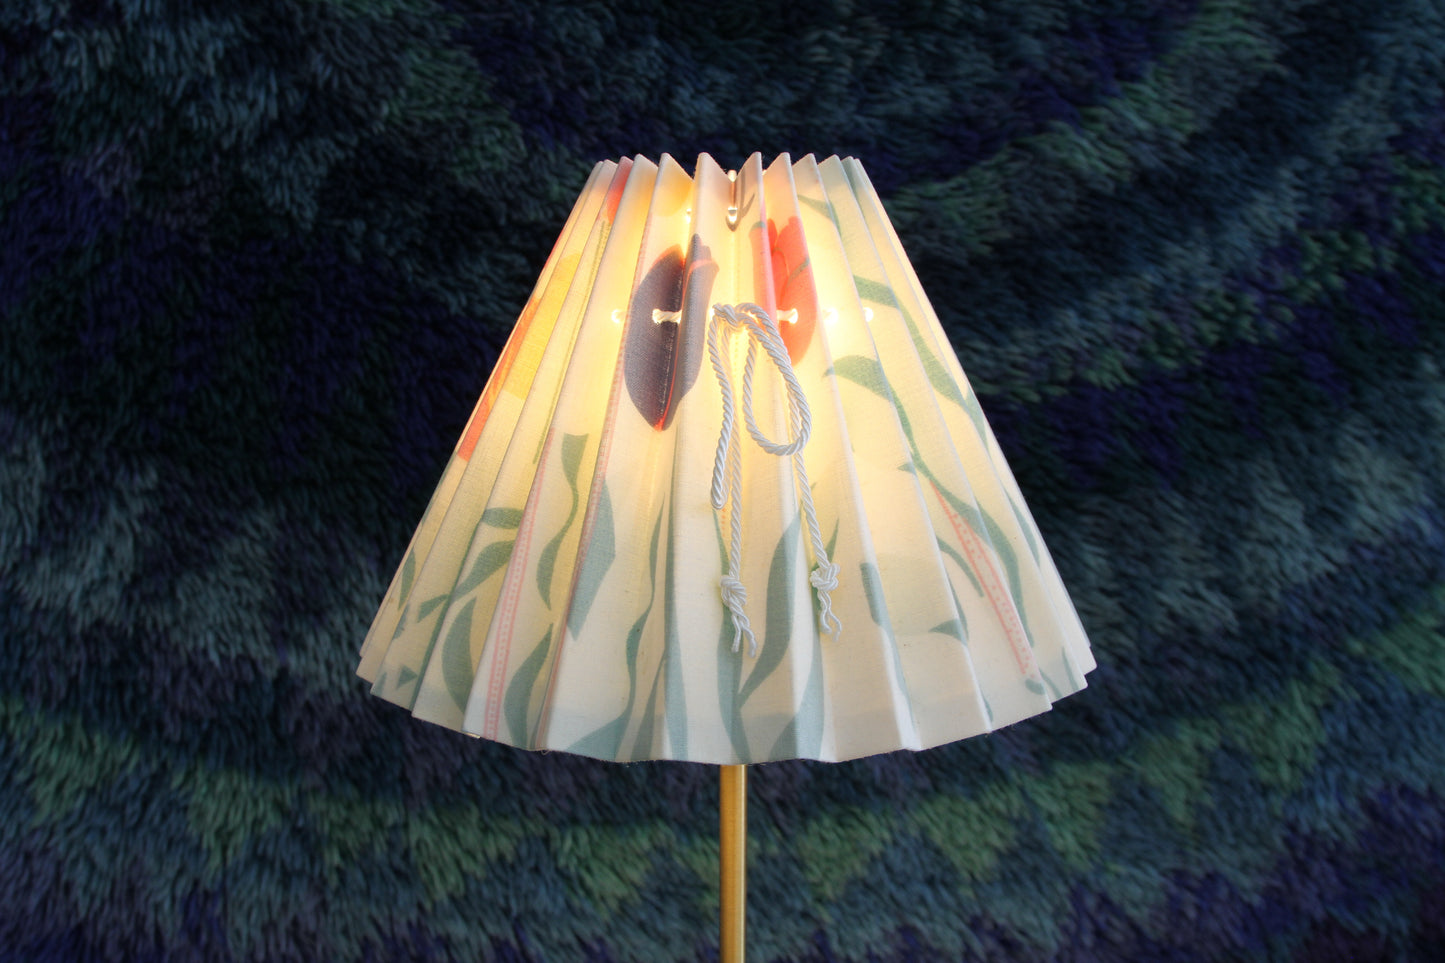 Josef Frank Brass "Dressing Lamp" with Floral Printed Shade